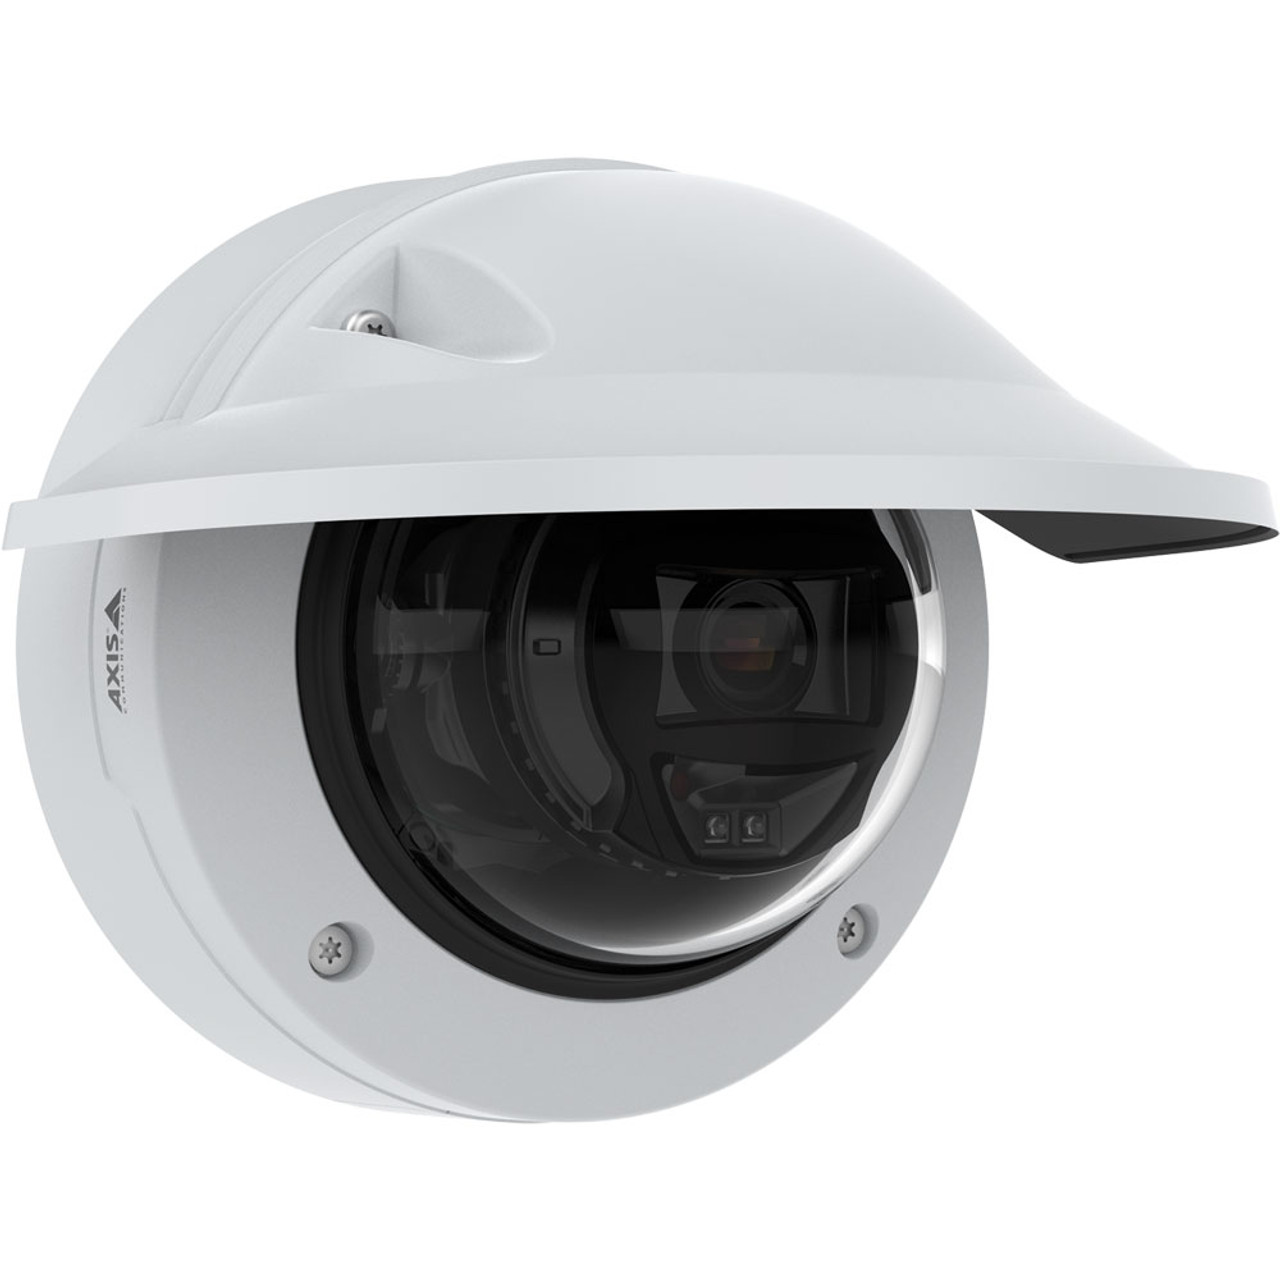 Axis P3265-LVE 1080p Deep Learning IR Outdoor Dome IP Camera - 02328-001